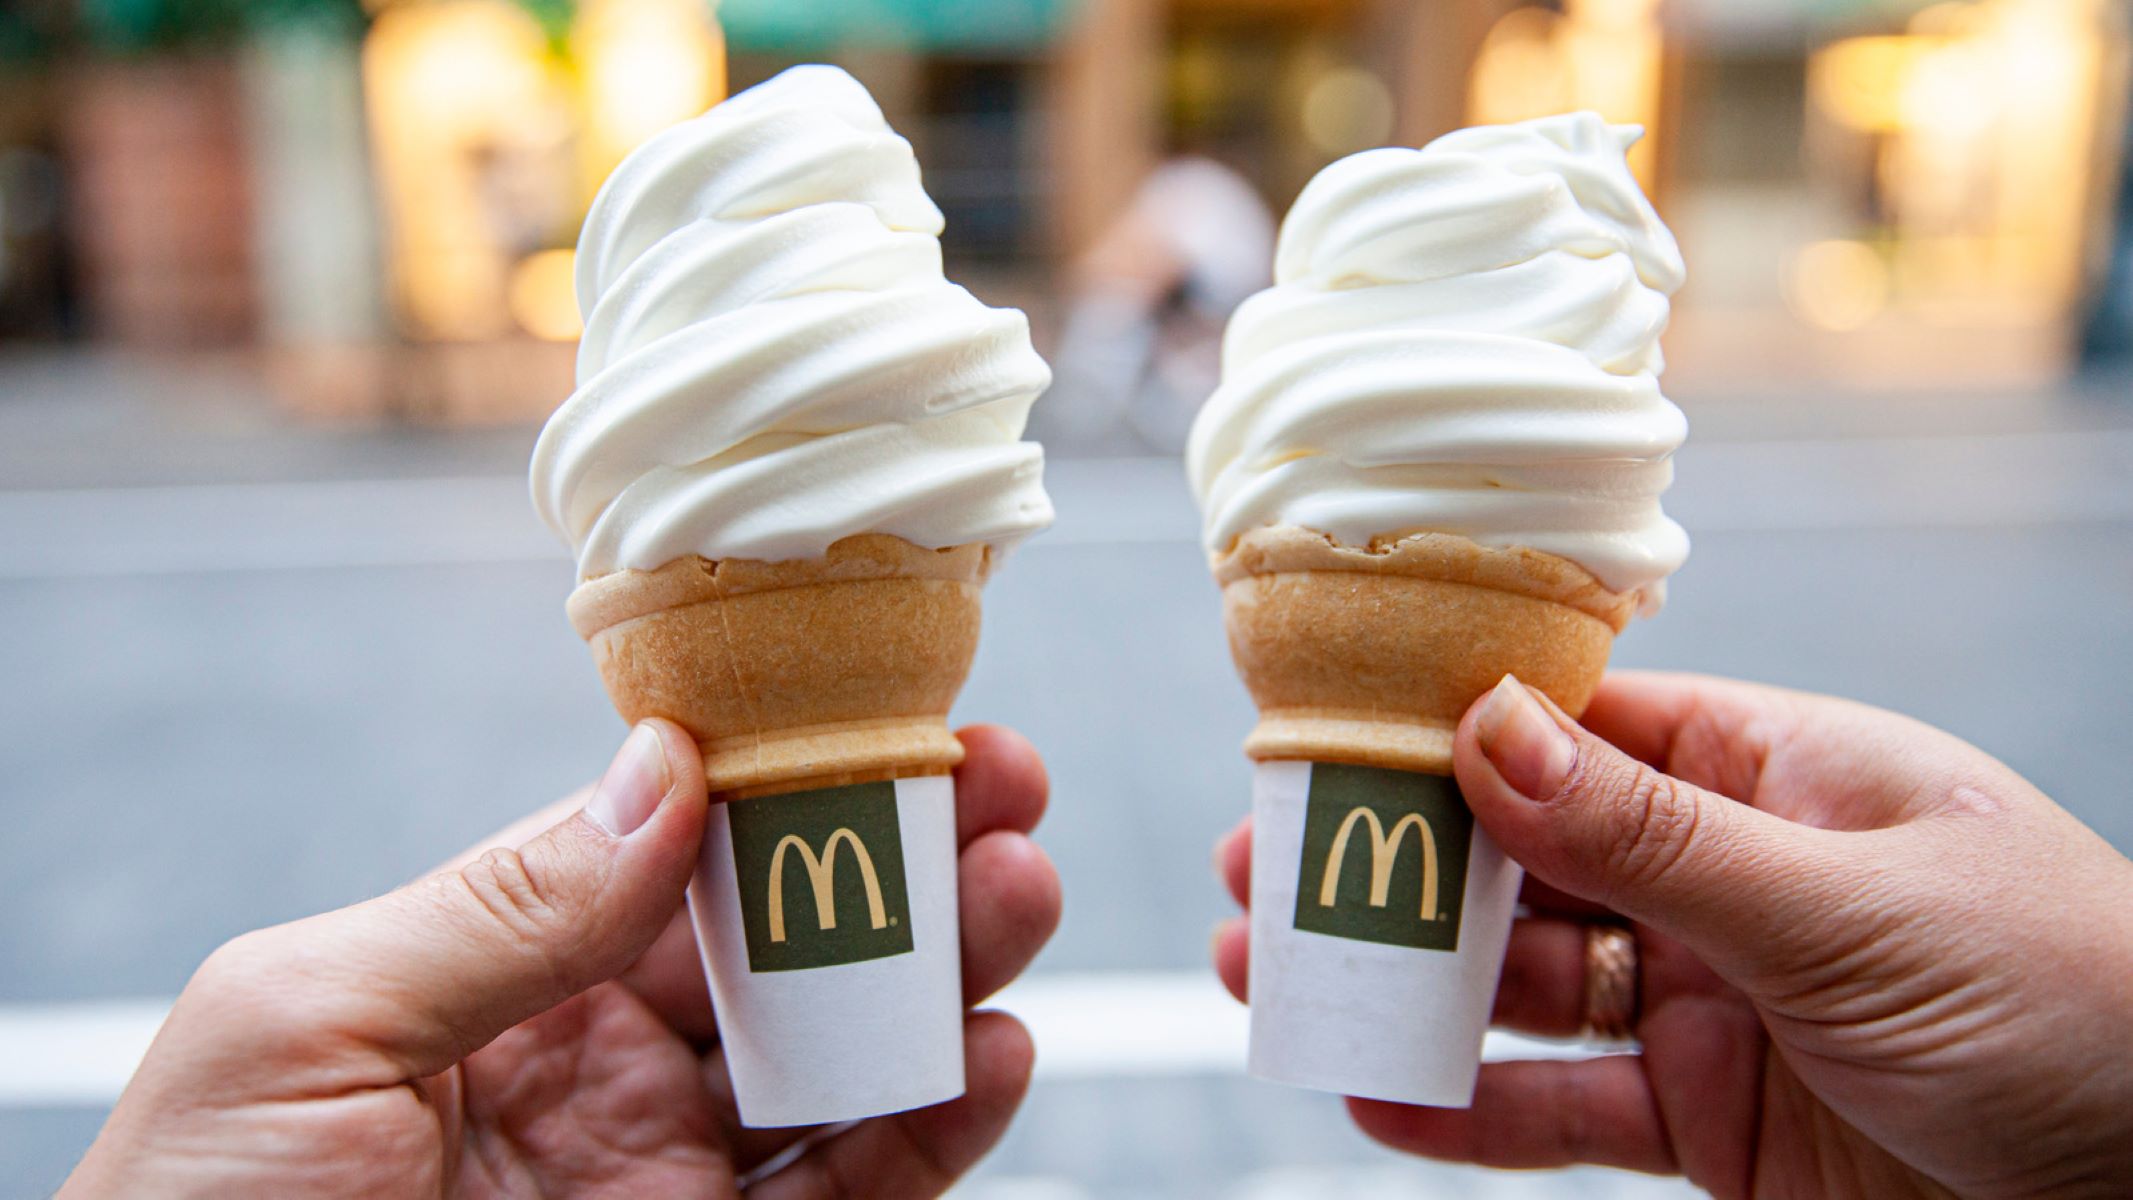 Outrageous! McDonald's Doubles Price Of Ice Cream Cones Overnight